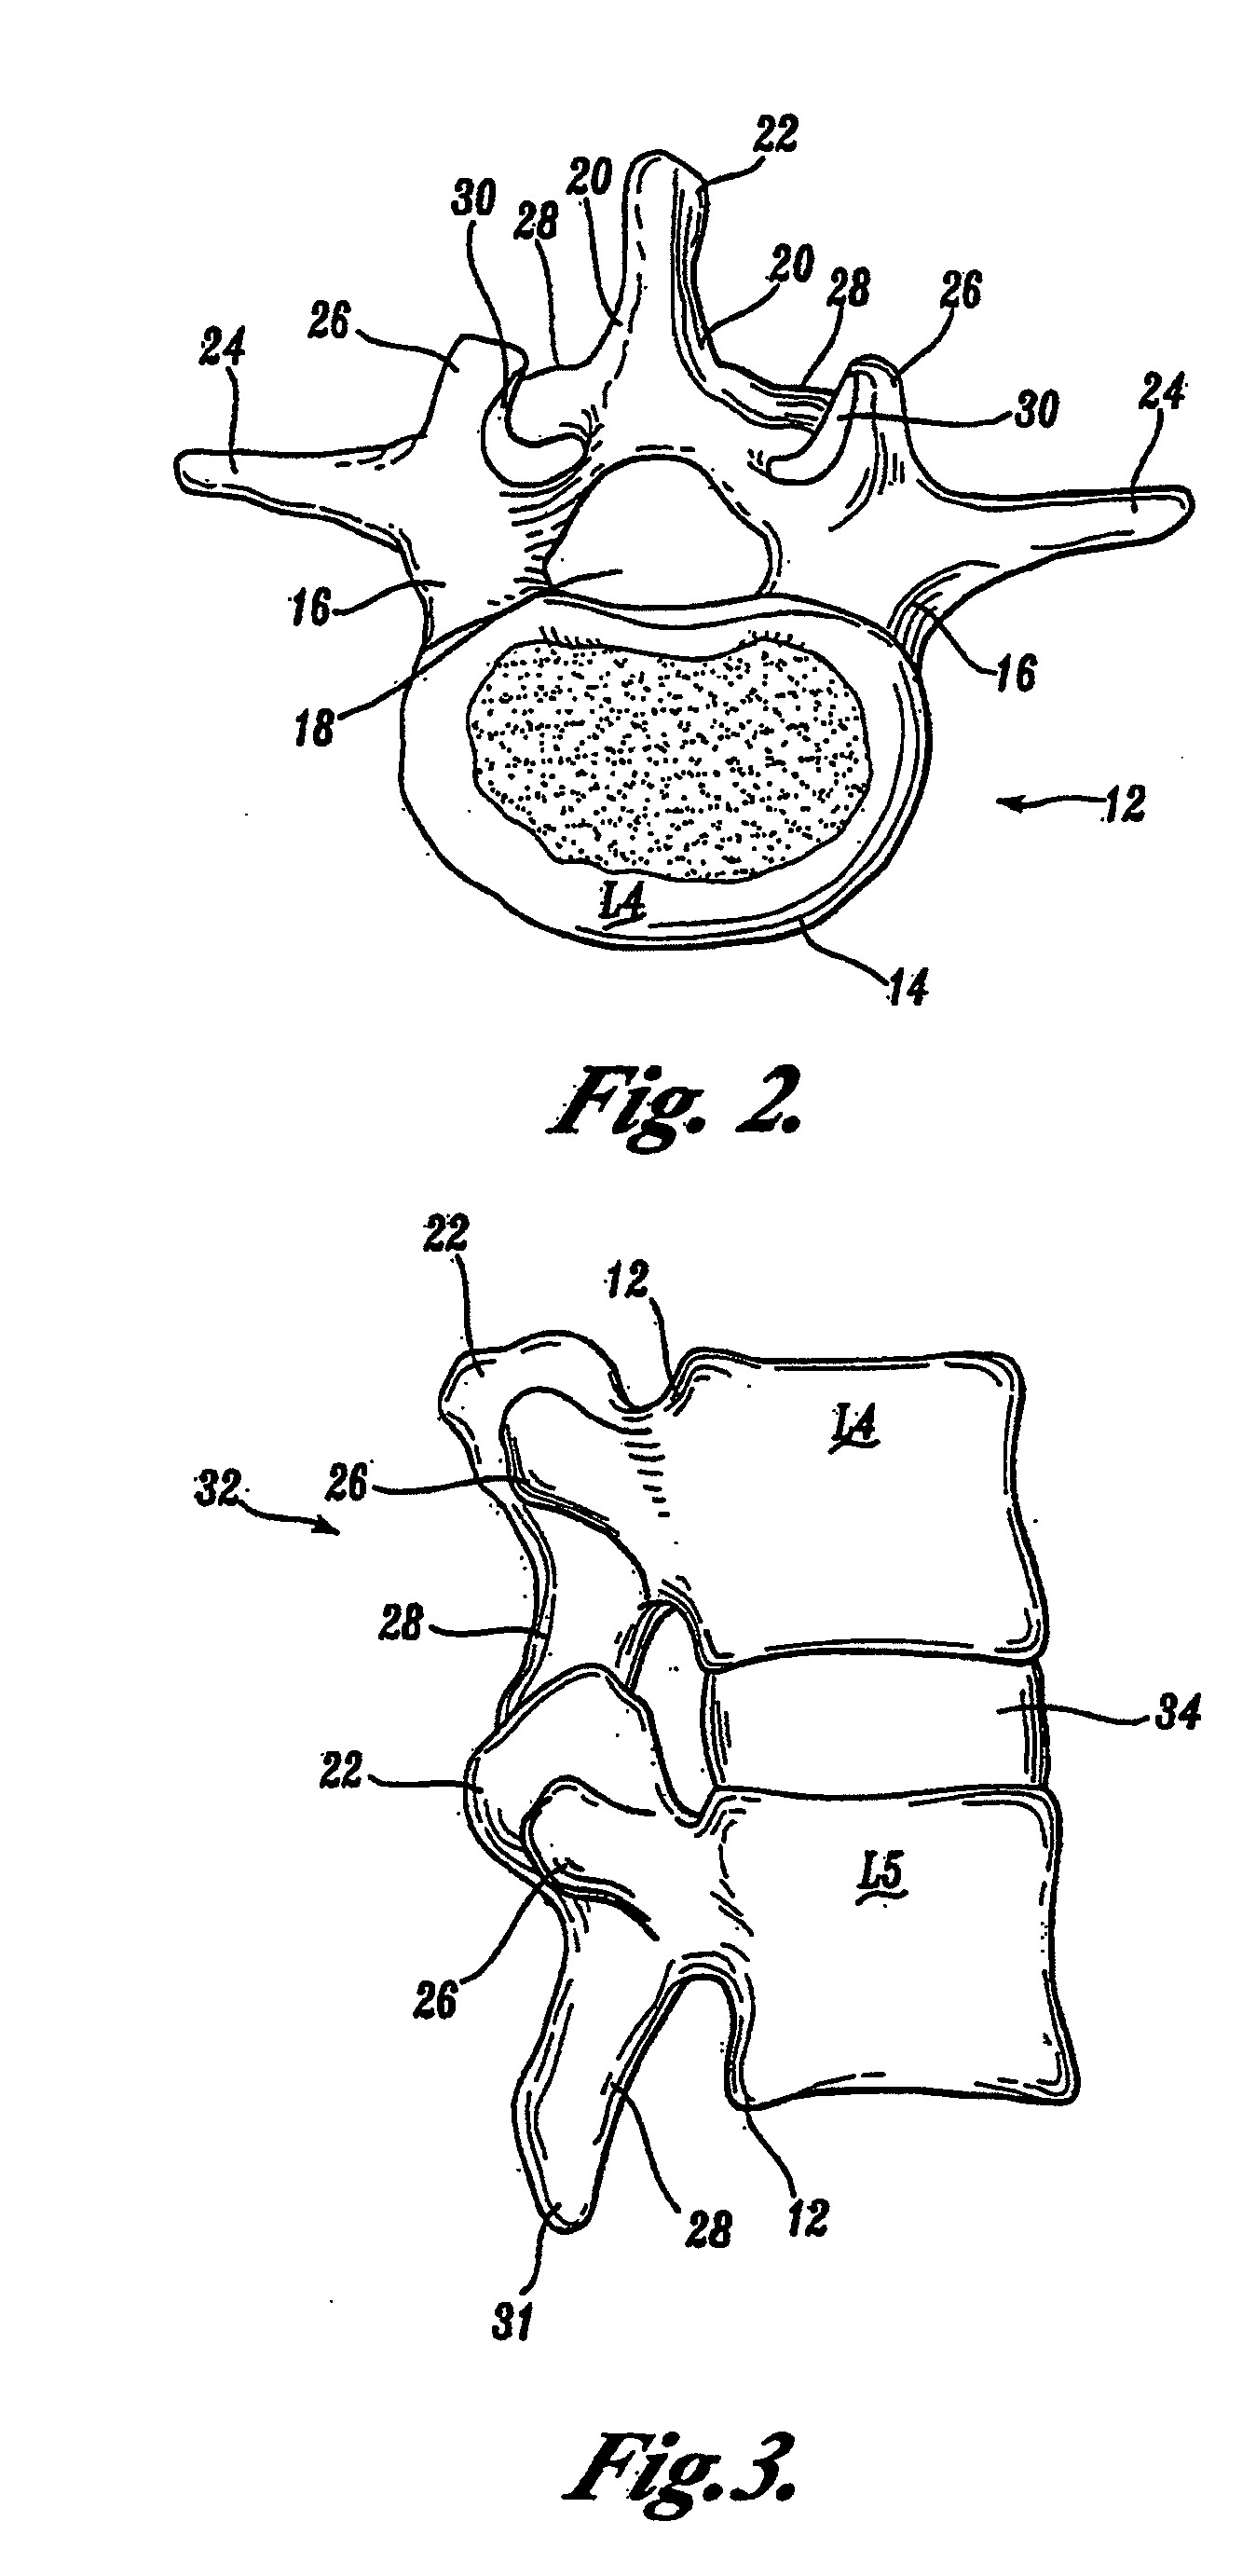 Prostheses, tools and methods for replacement of natural facet joints with artificial facet joint surfaces